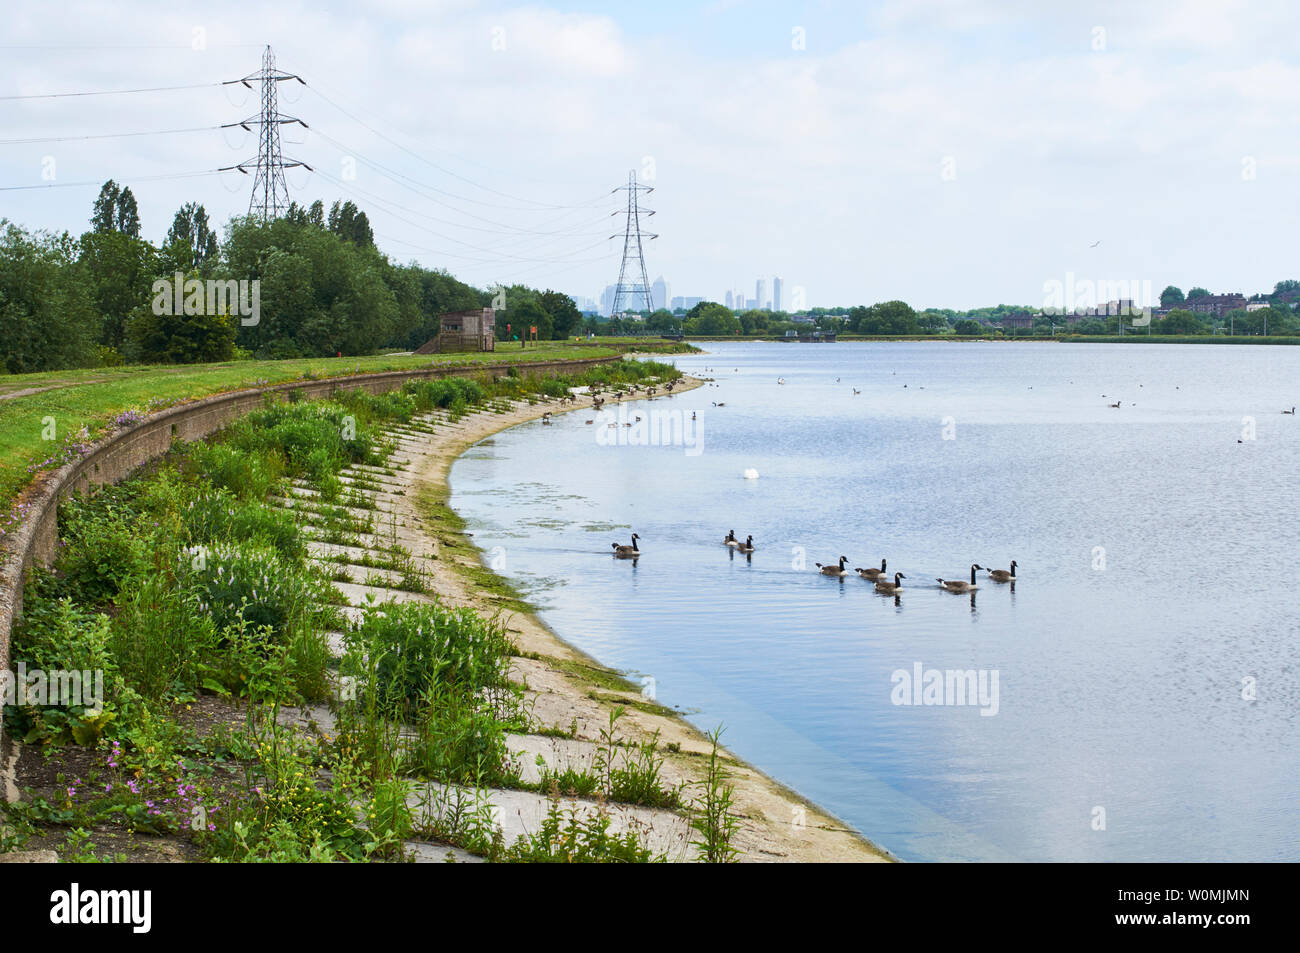 Warwick Reservoir East on Walthamstow Wetlands, North London UK, with Canary Wharf in the far distance Stock Photo